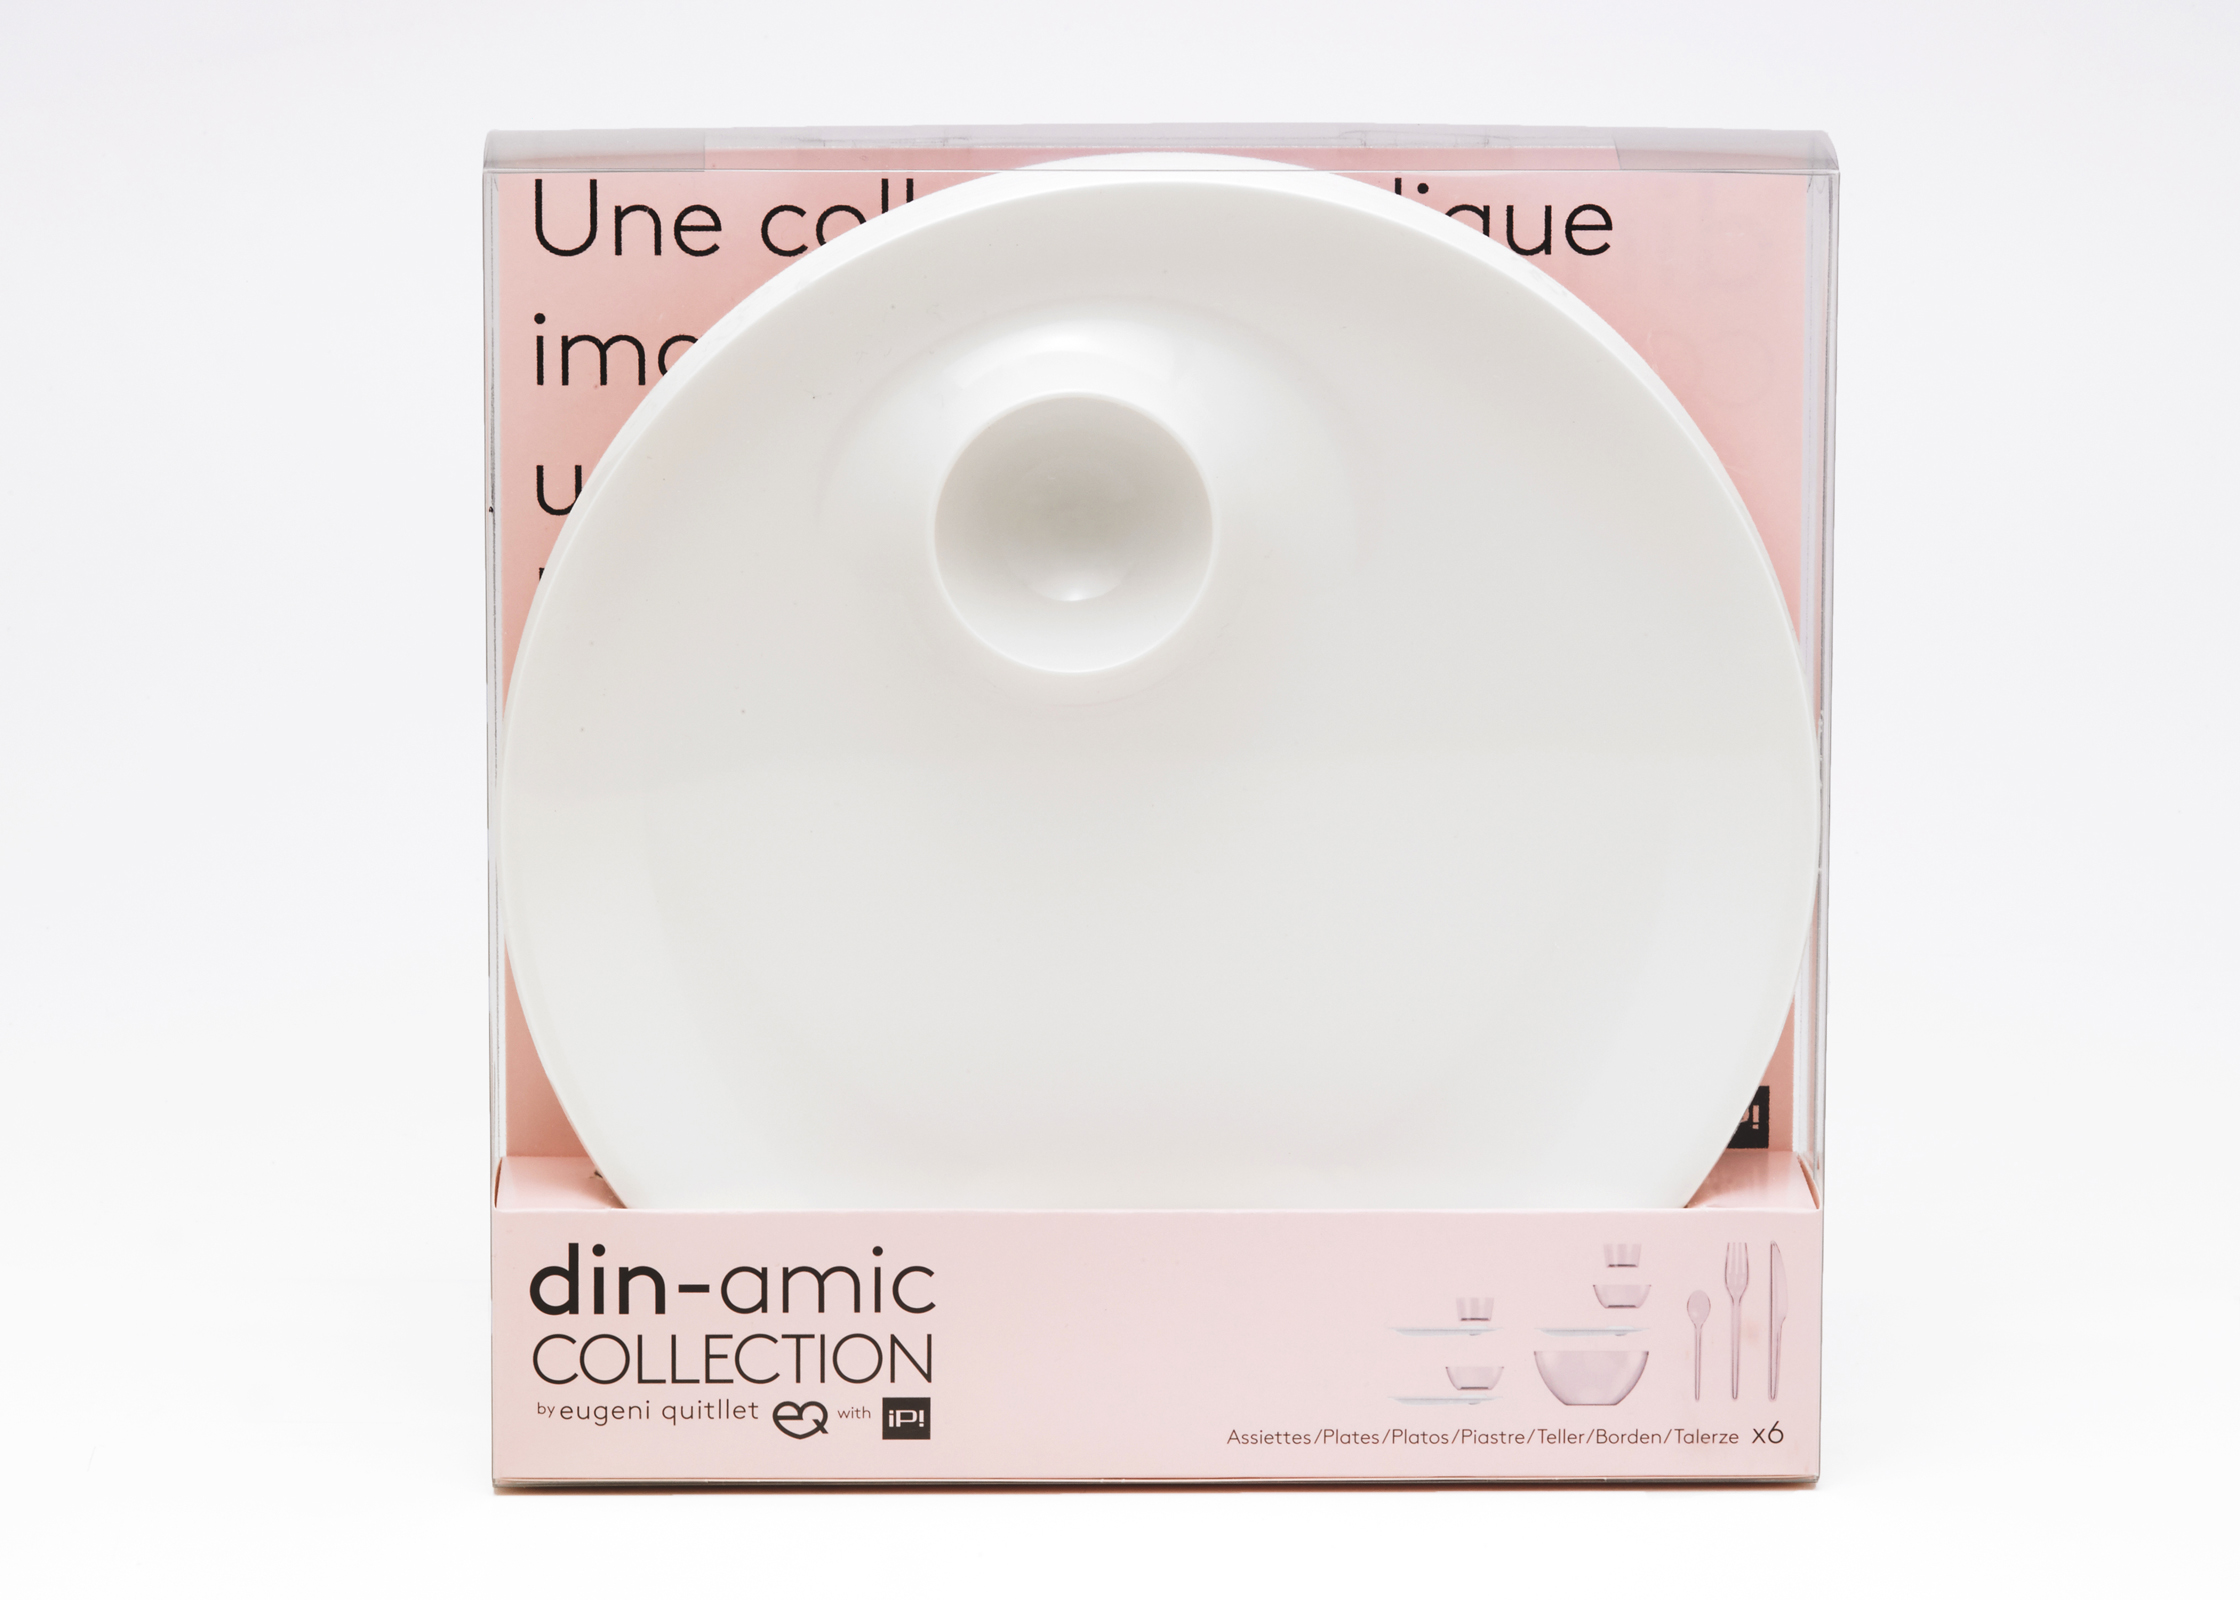 DIN-AMIC COLLECTION POMPIDOU EDITION